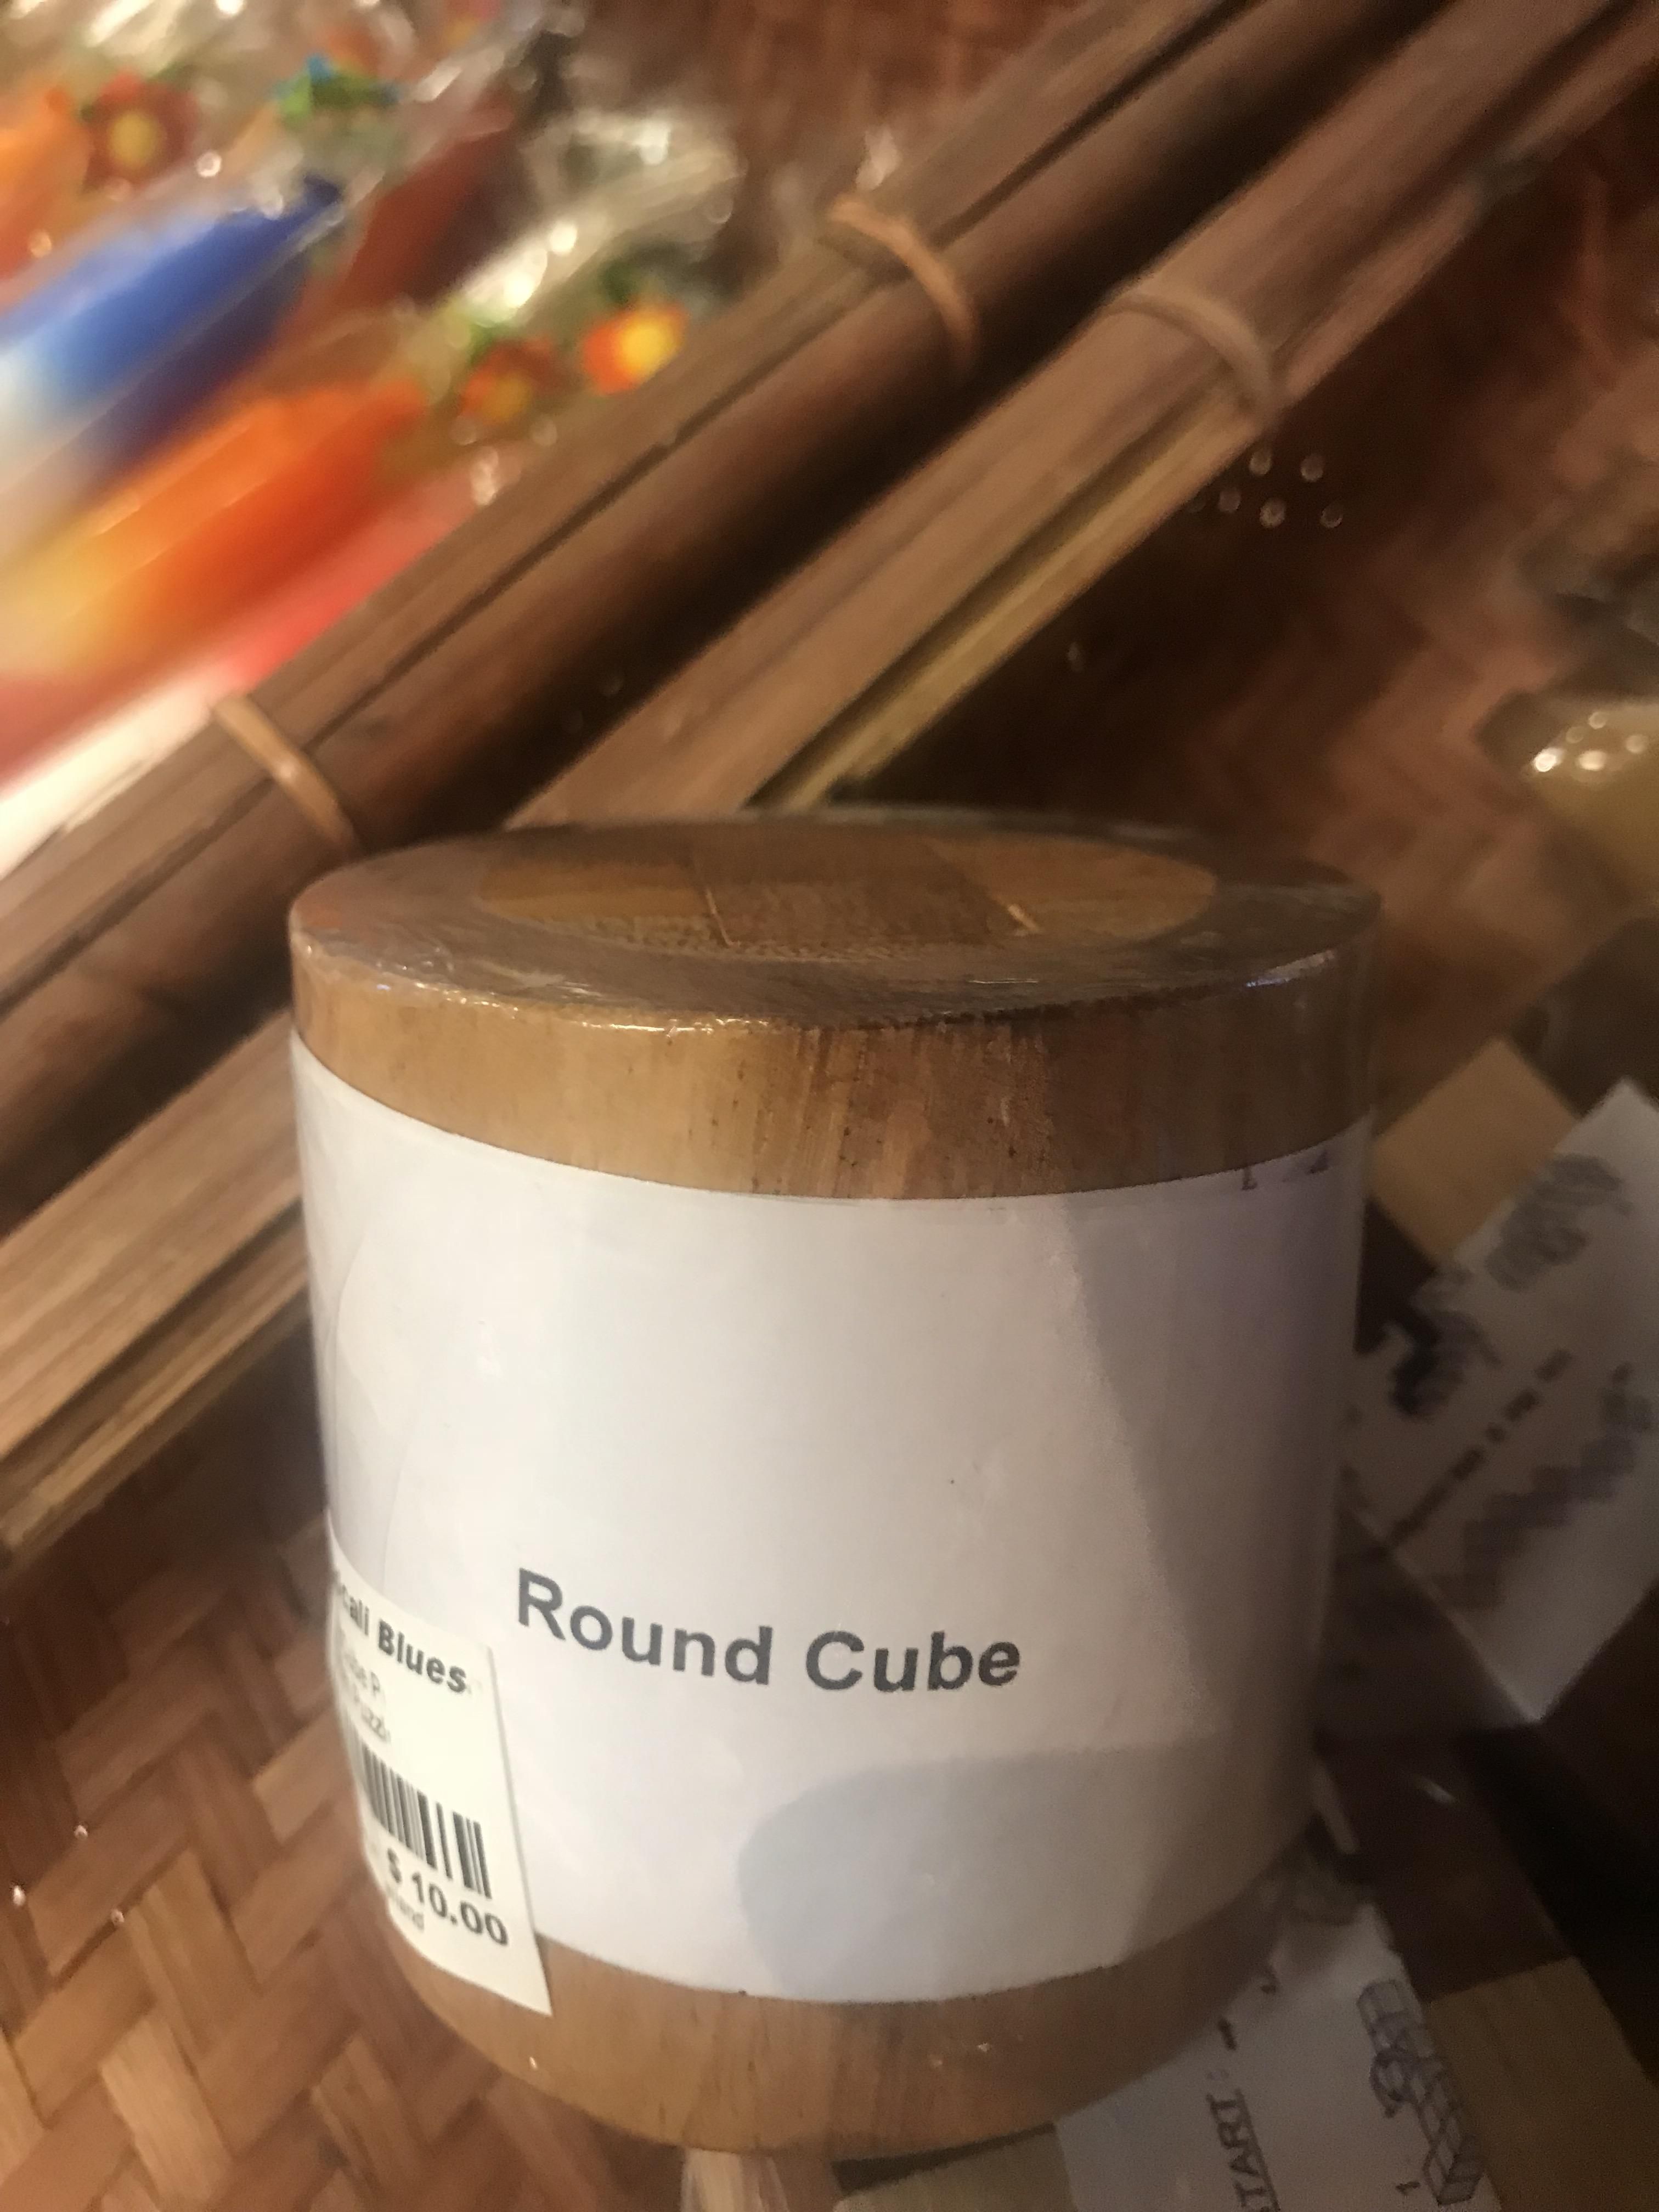 I think the word you’re looking for is ‘cylinder’